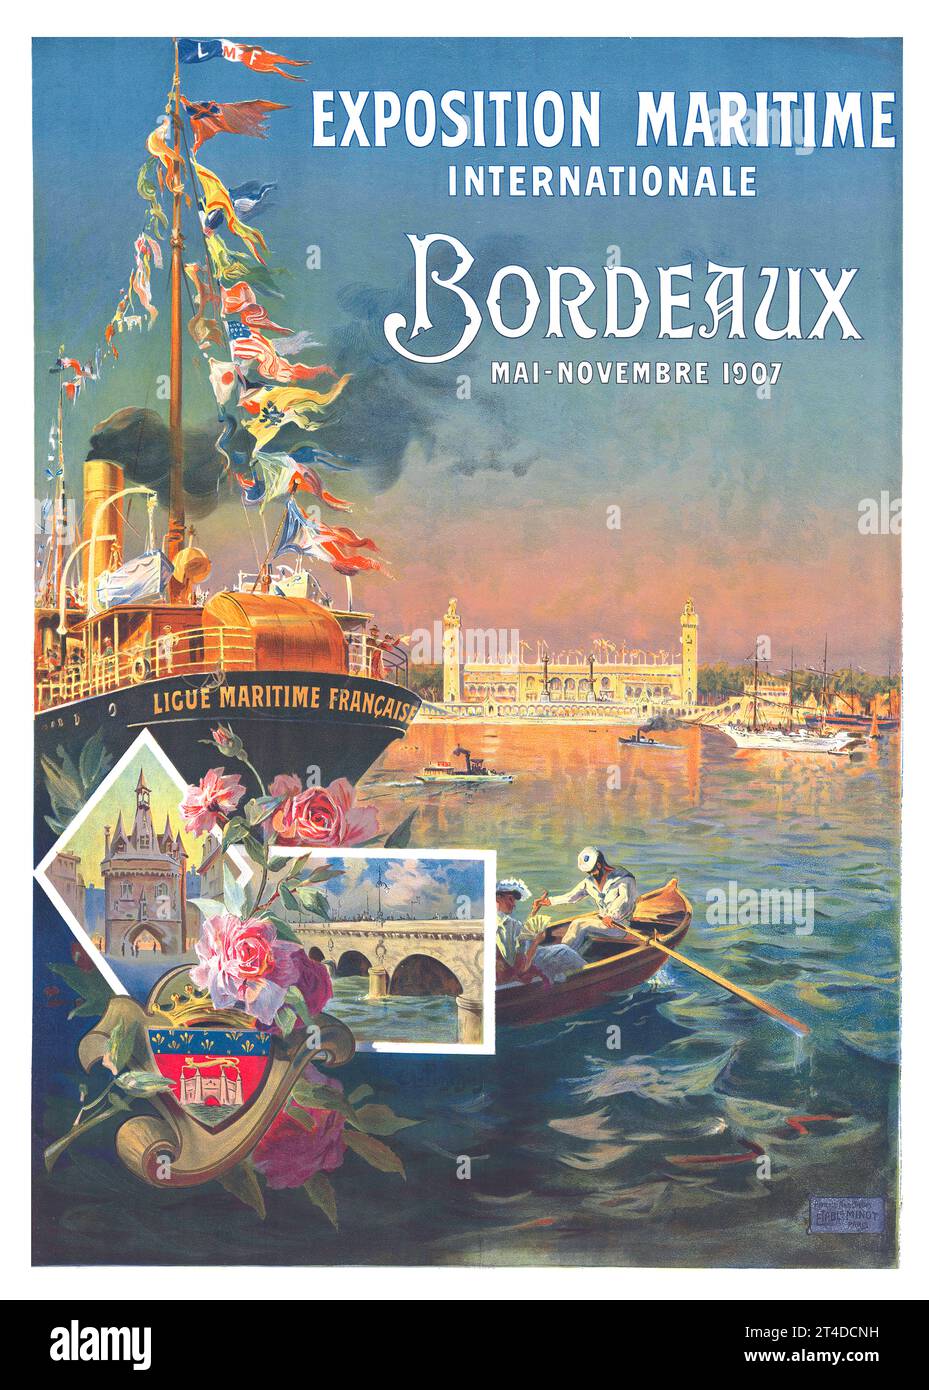 International Maritime exhibition in Bordeaux France.Vintage Travel Poster 1800’s Stock Photo